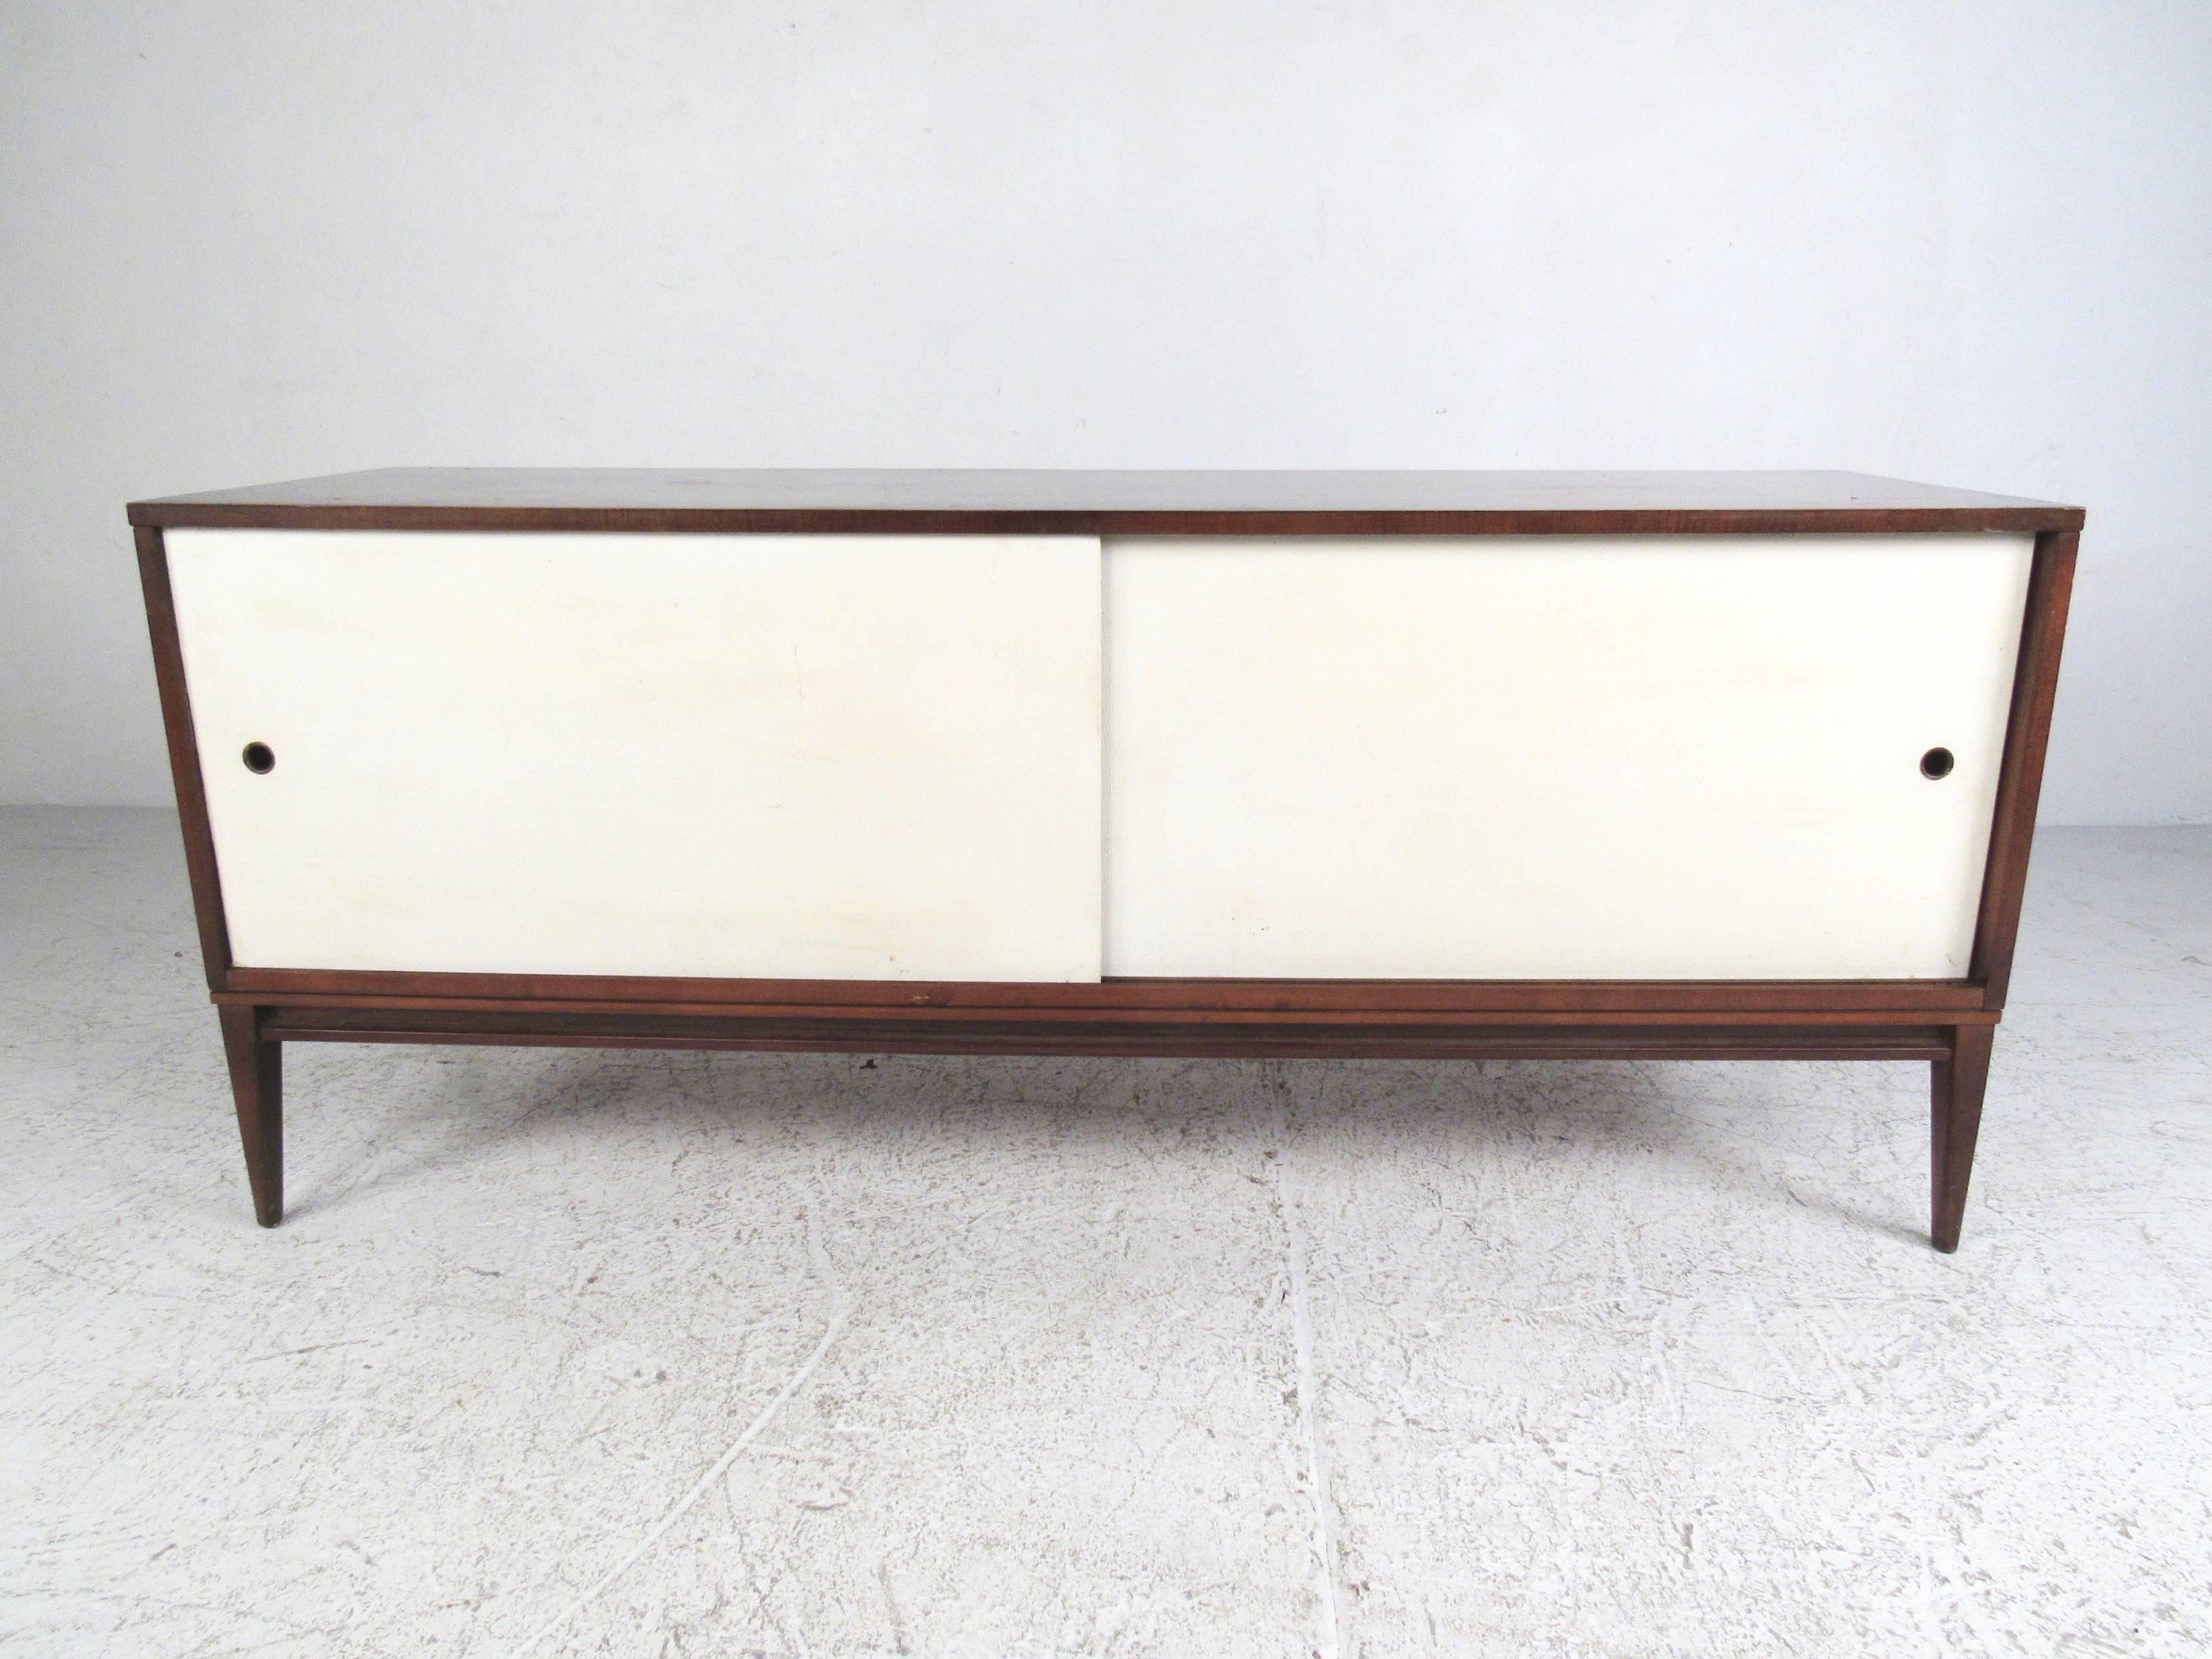 This vintage modern sliding door credenza features the unique mid-century construction of Paul McCobb and features tapered legs, simple lines, and cloth lines doors. Spacious interior cabinet space makes this ideal for home or office, and a great